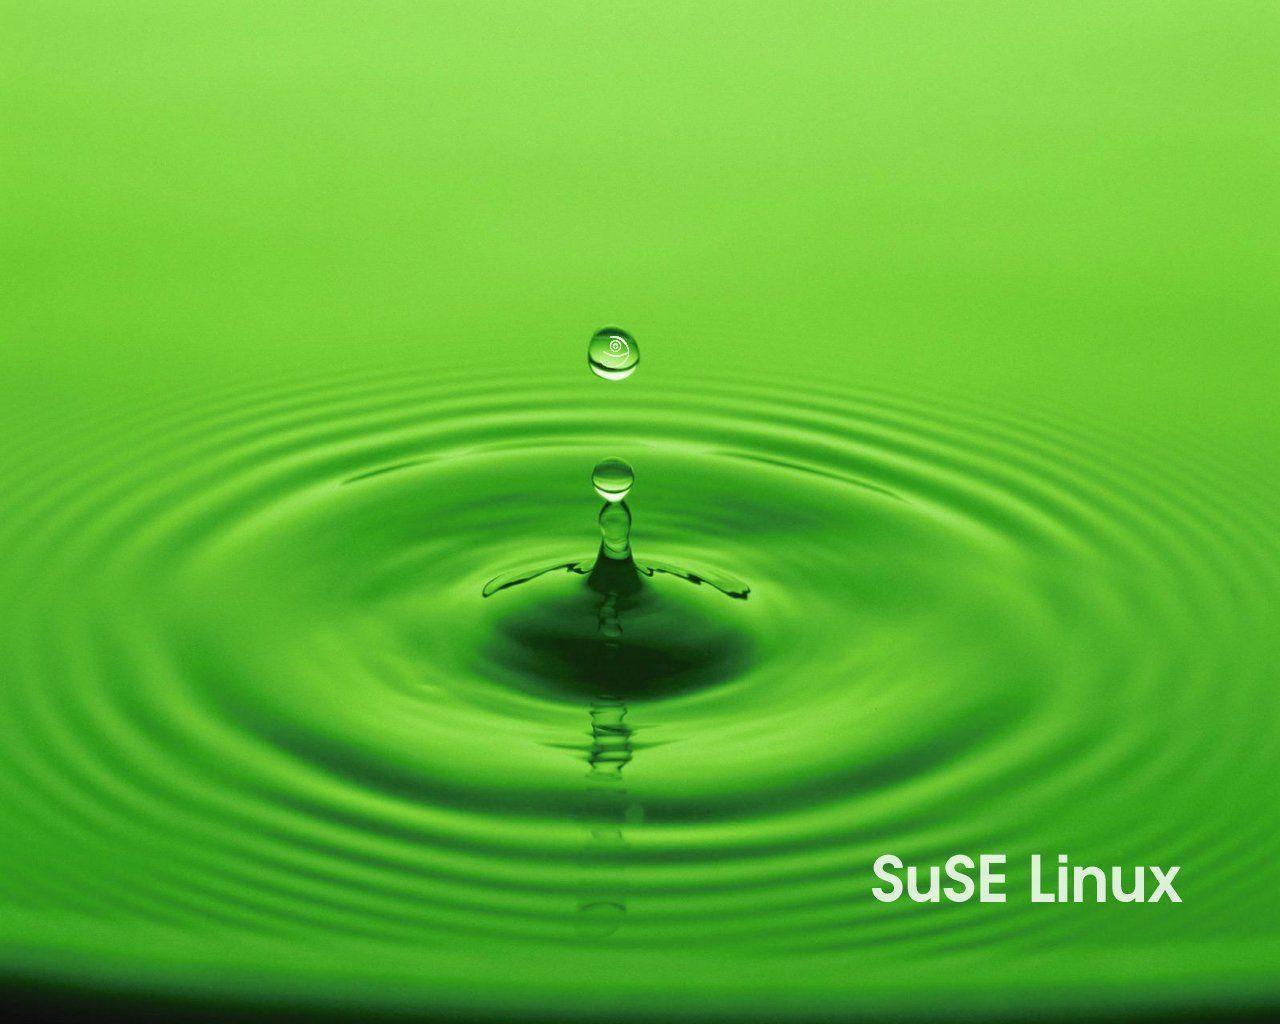 Opensuse Wallpapers Wallpaper Cave